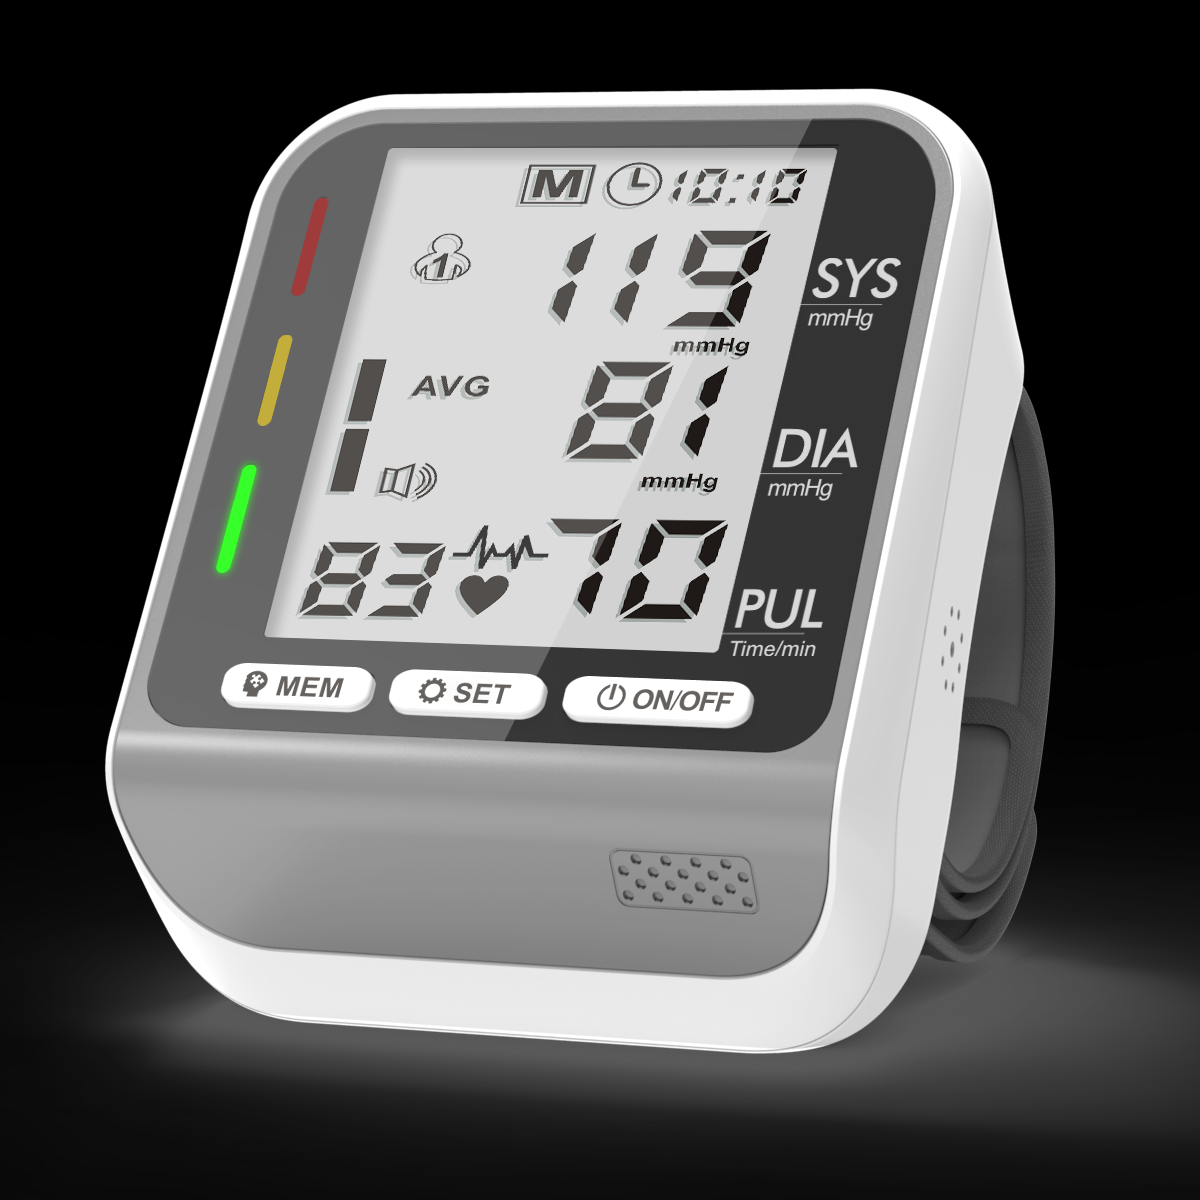 touch screen for blood pressure instrument